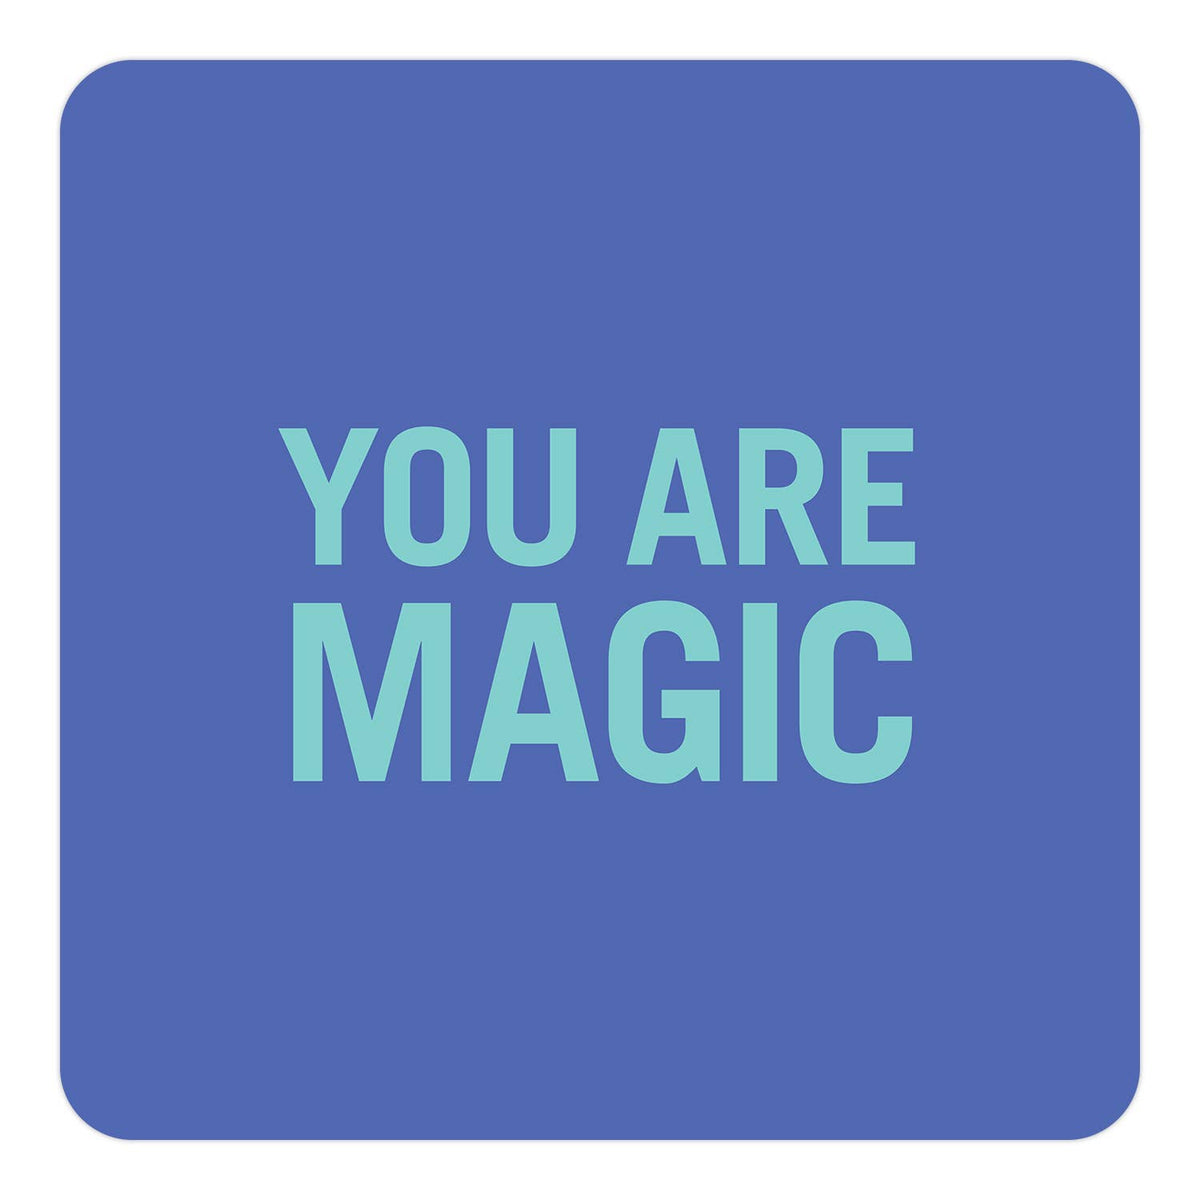 You Are Magic Inner-Truth Deck